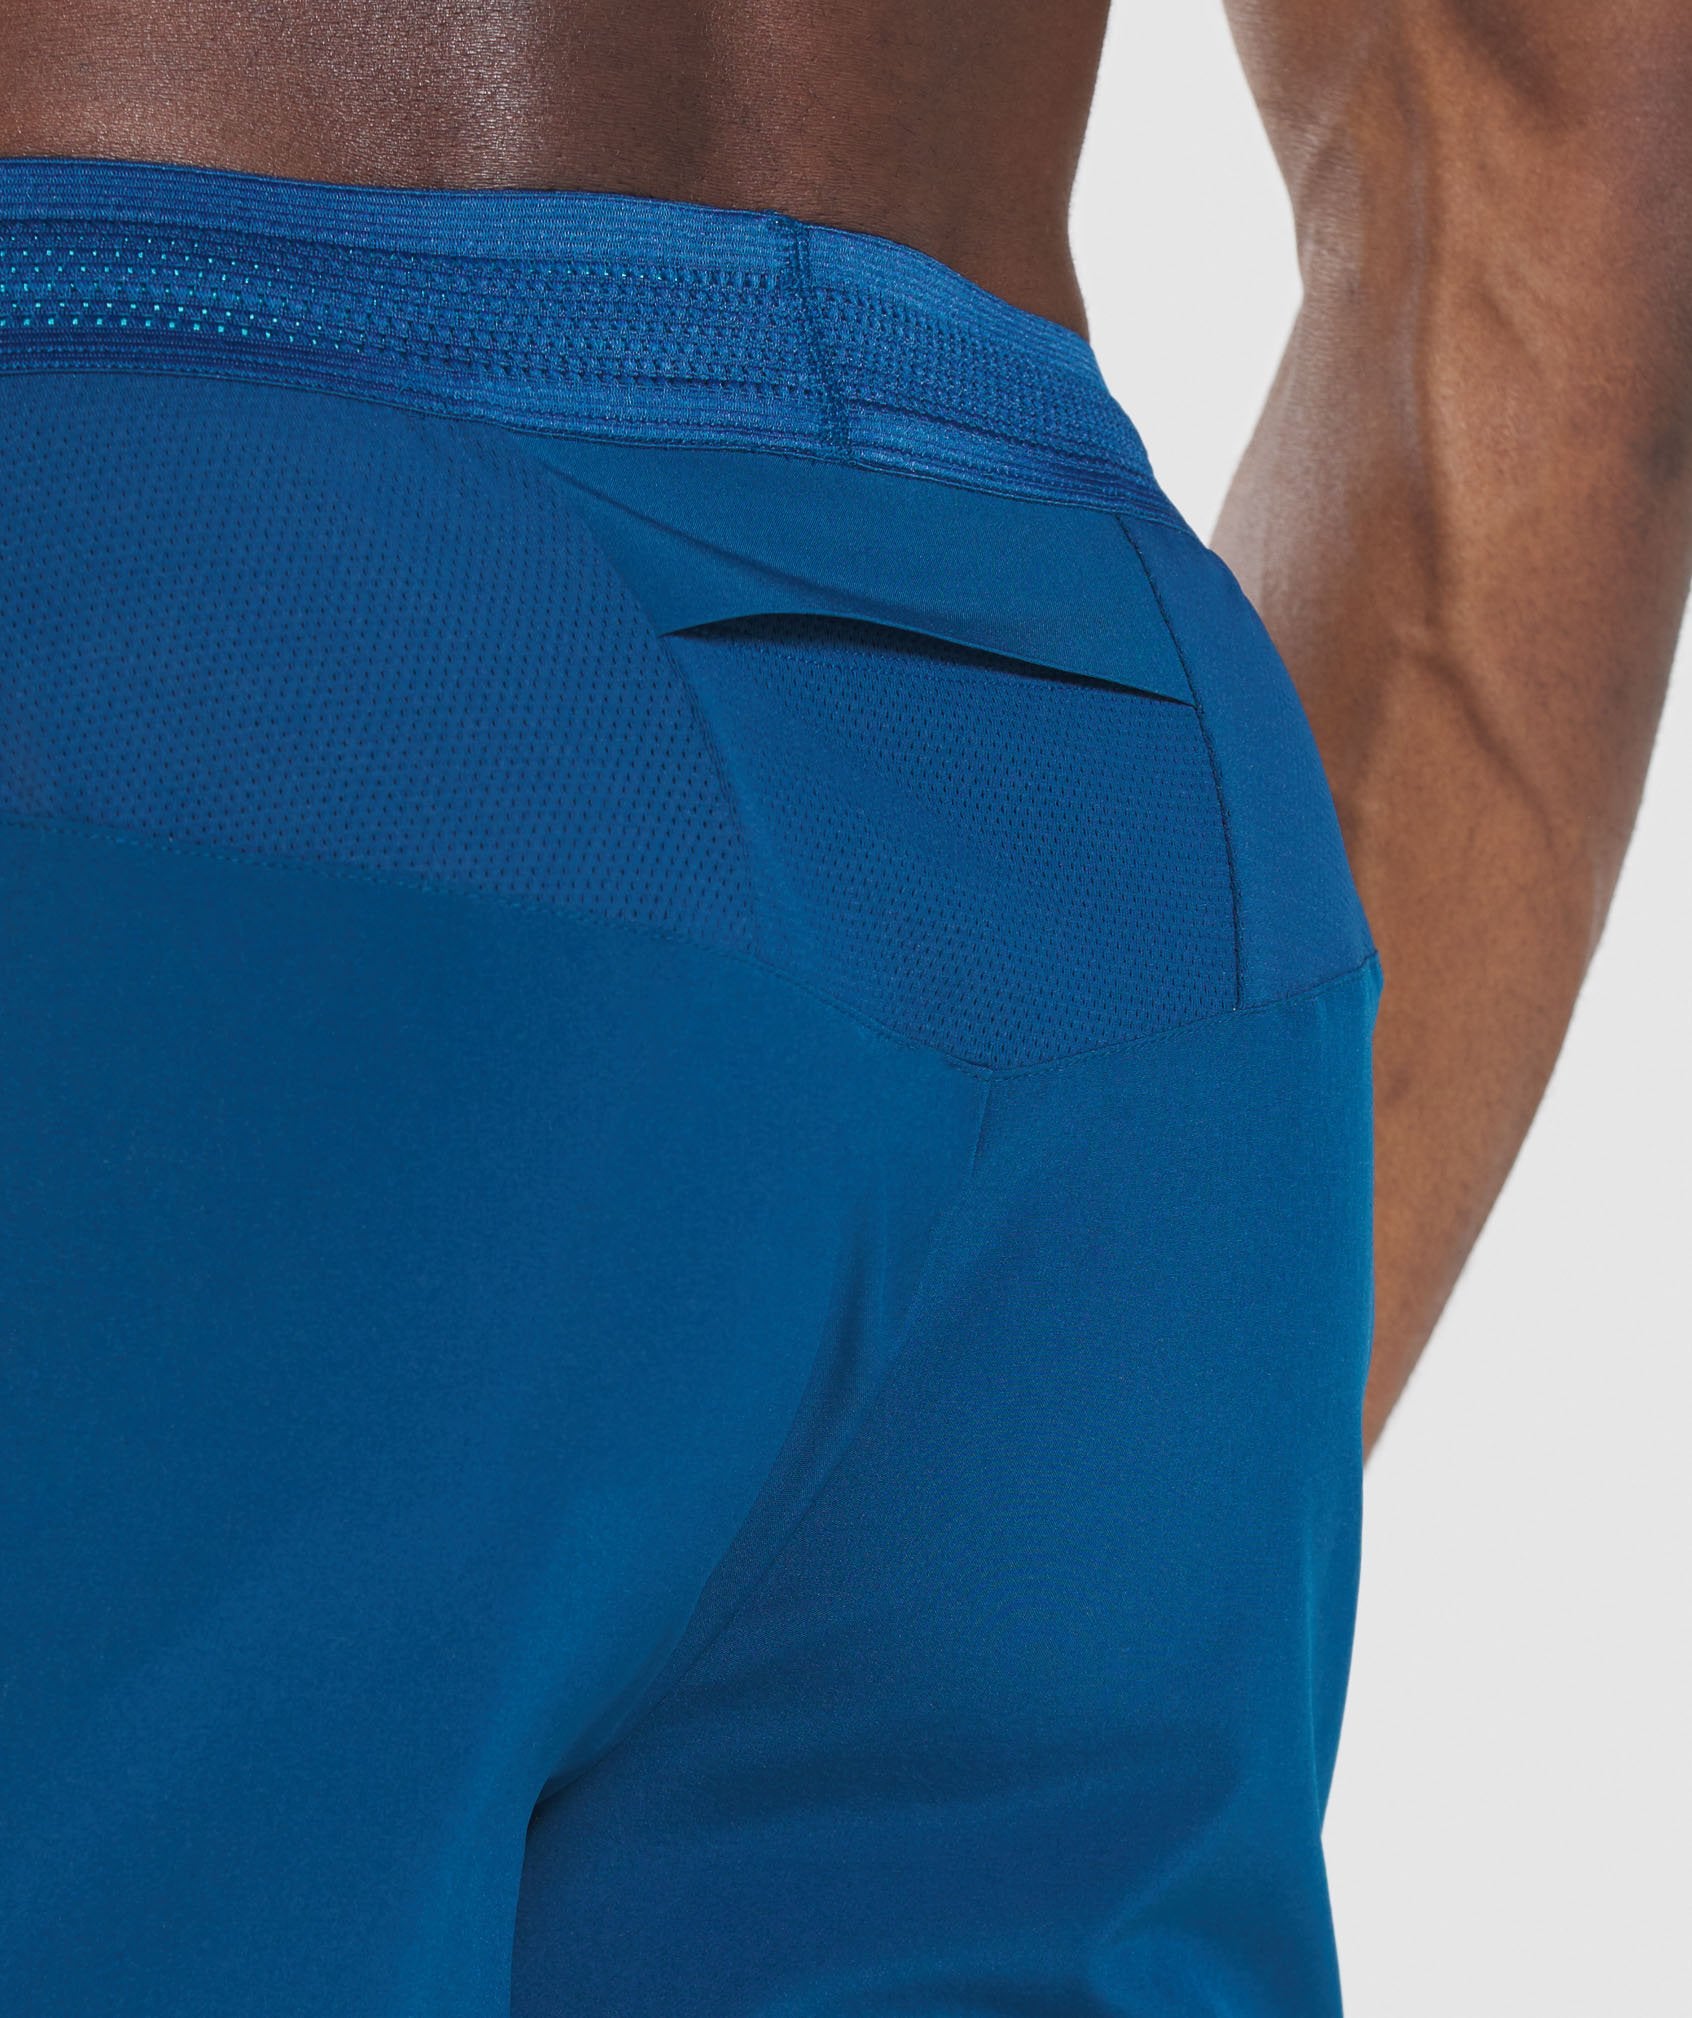 Speed 5" Shorts in Petrol Blue - view 5